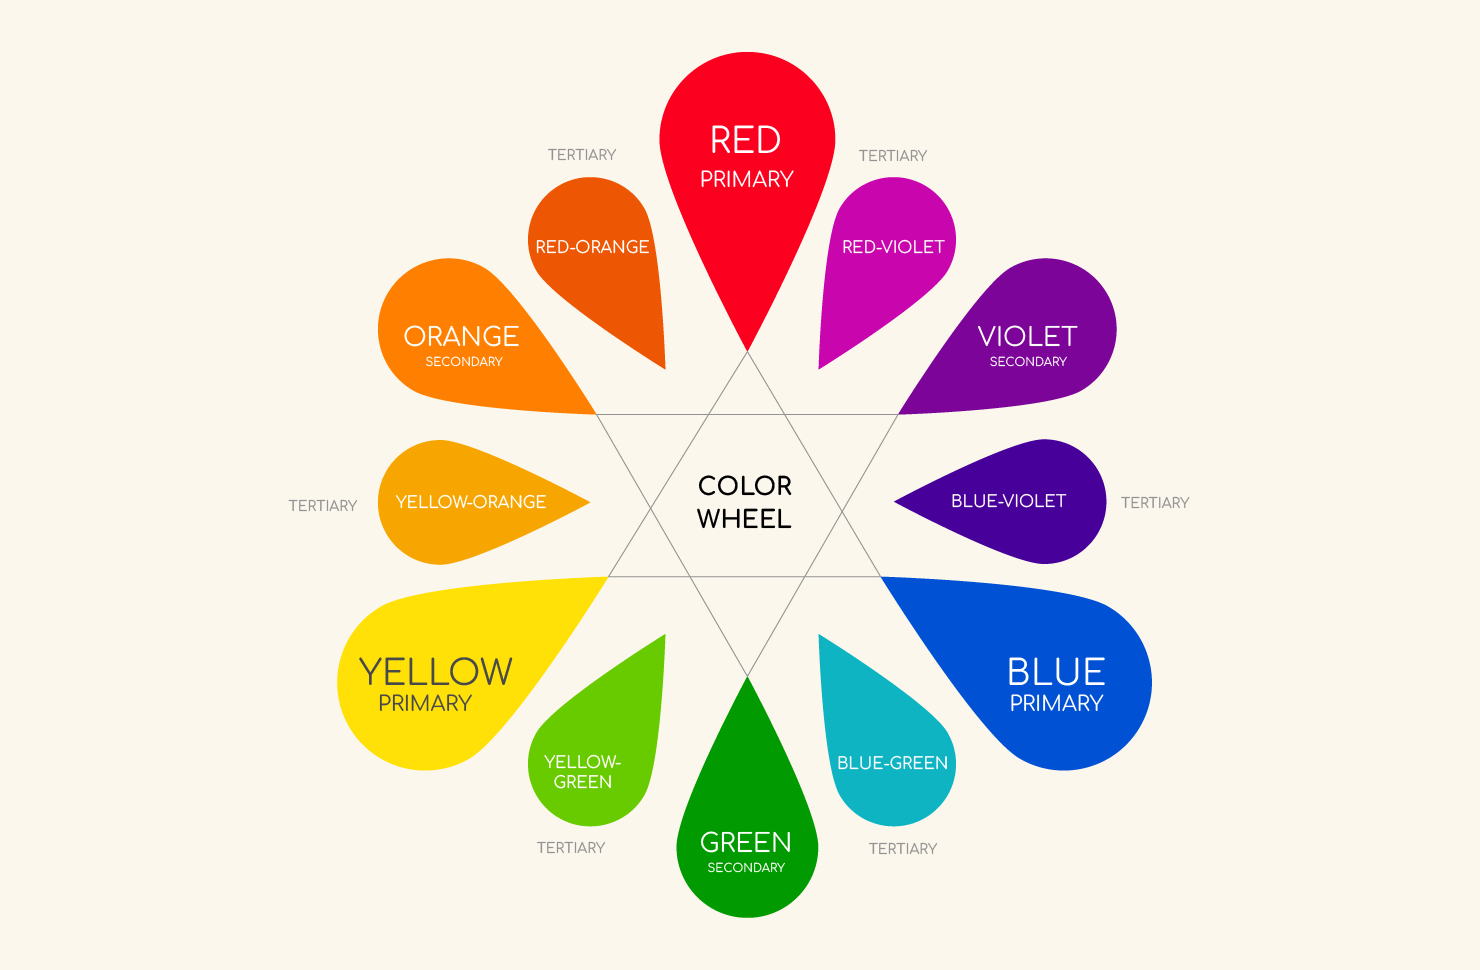 What Are Tertiary Colors and How Do You Make Them? - Color Meanings